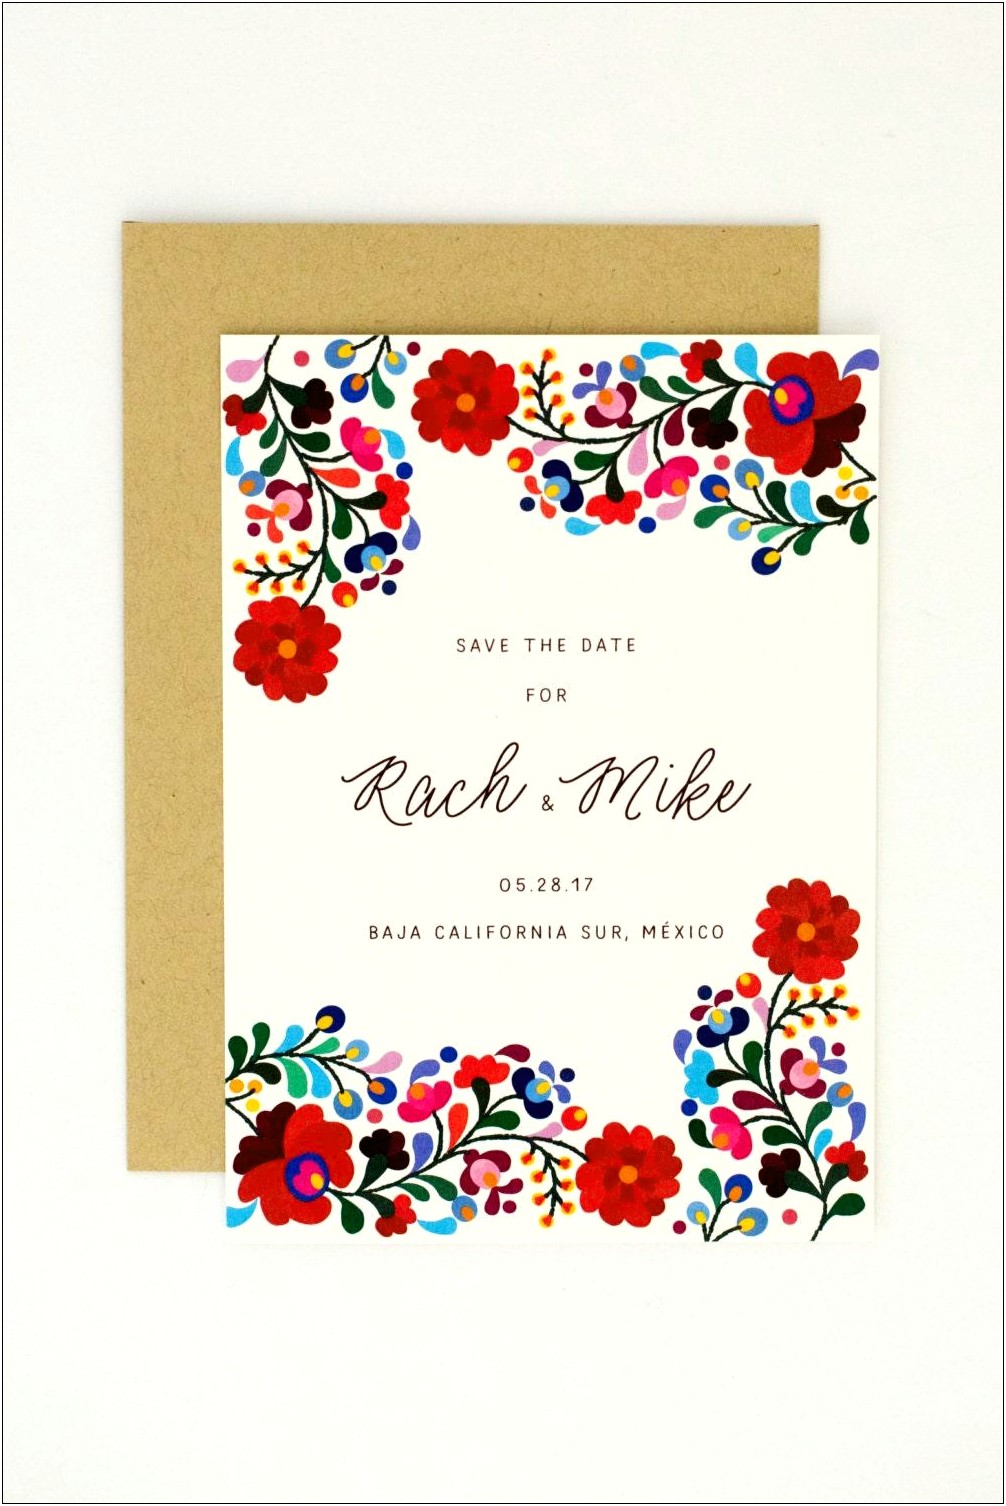 Floral Destination Wedding Invitations Colorful Mexican Embroidery Inspired